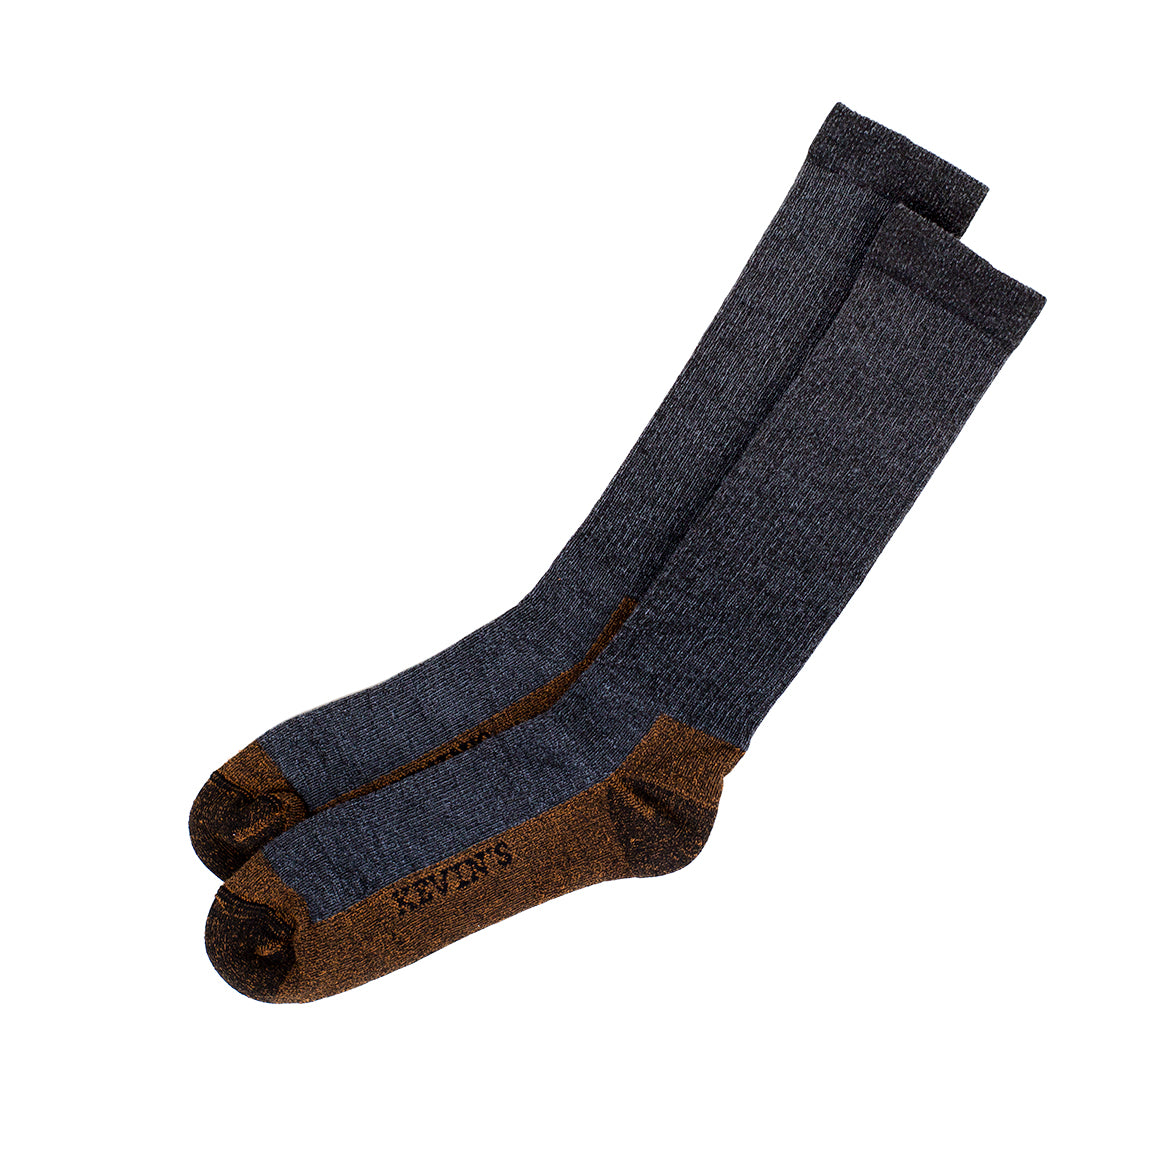 Kevin's Cupron Copper Infused Crew Sock-Footwear-Navy/Charcoal-L-Kevin's Fine Outdoor Gear & Apparel